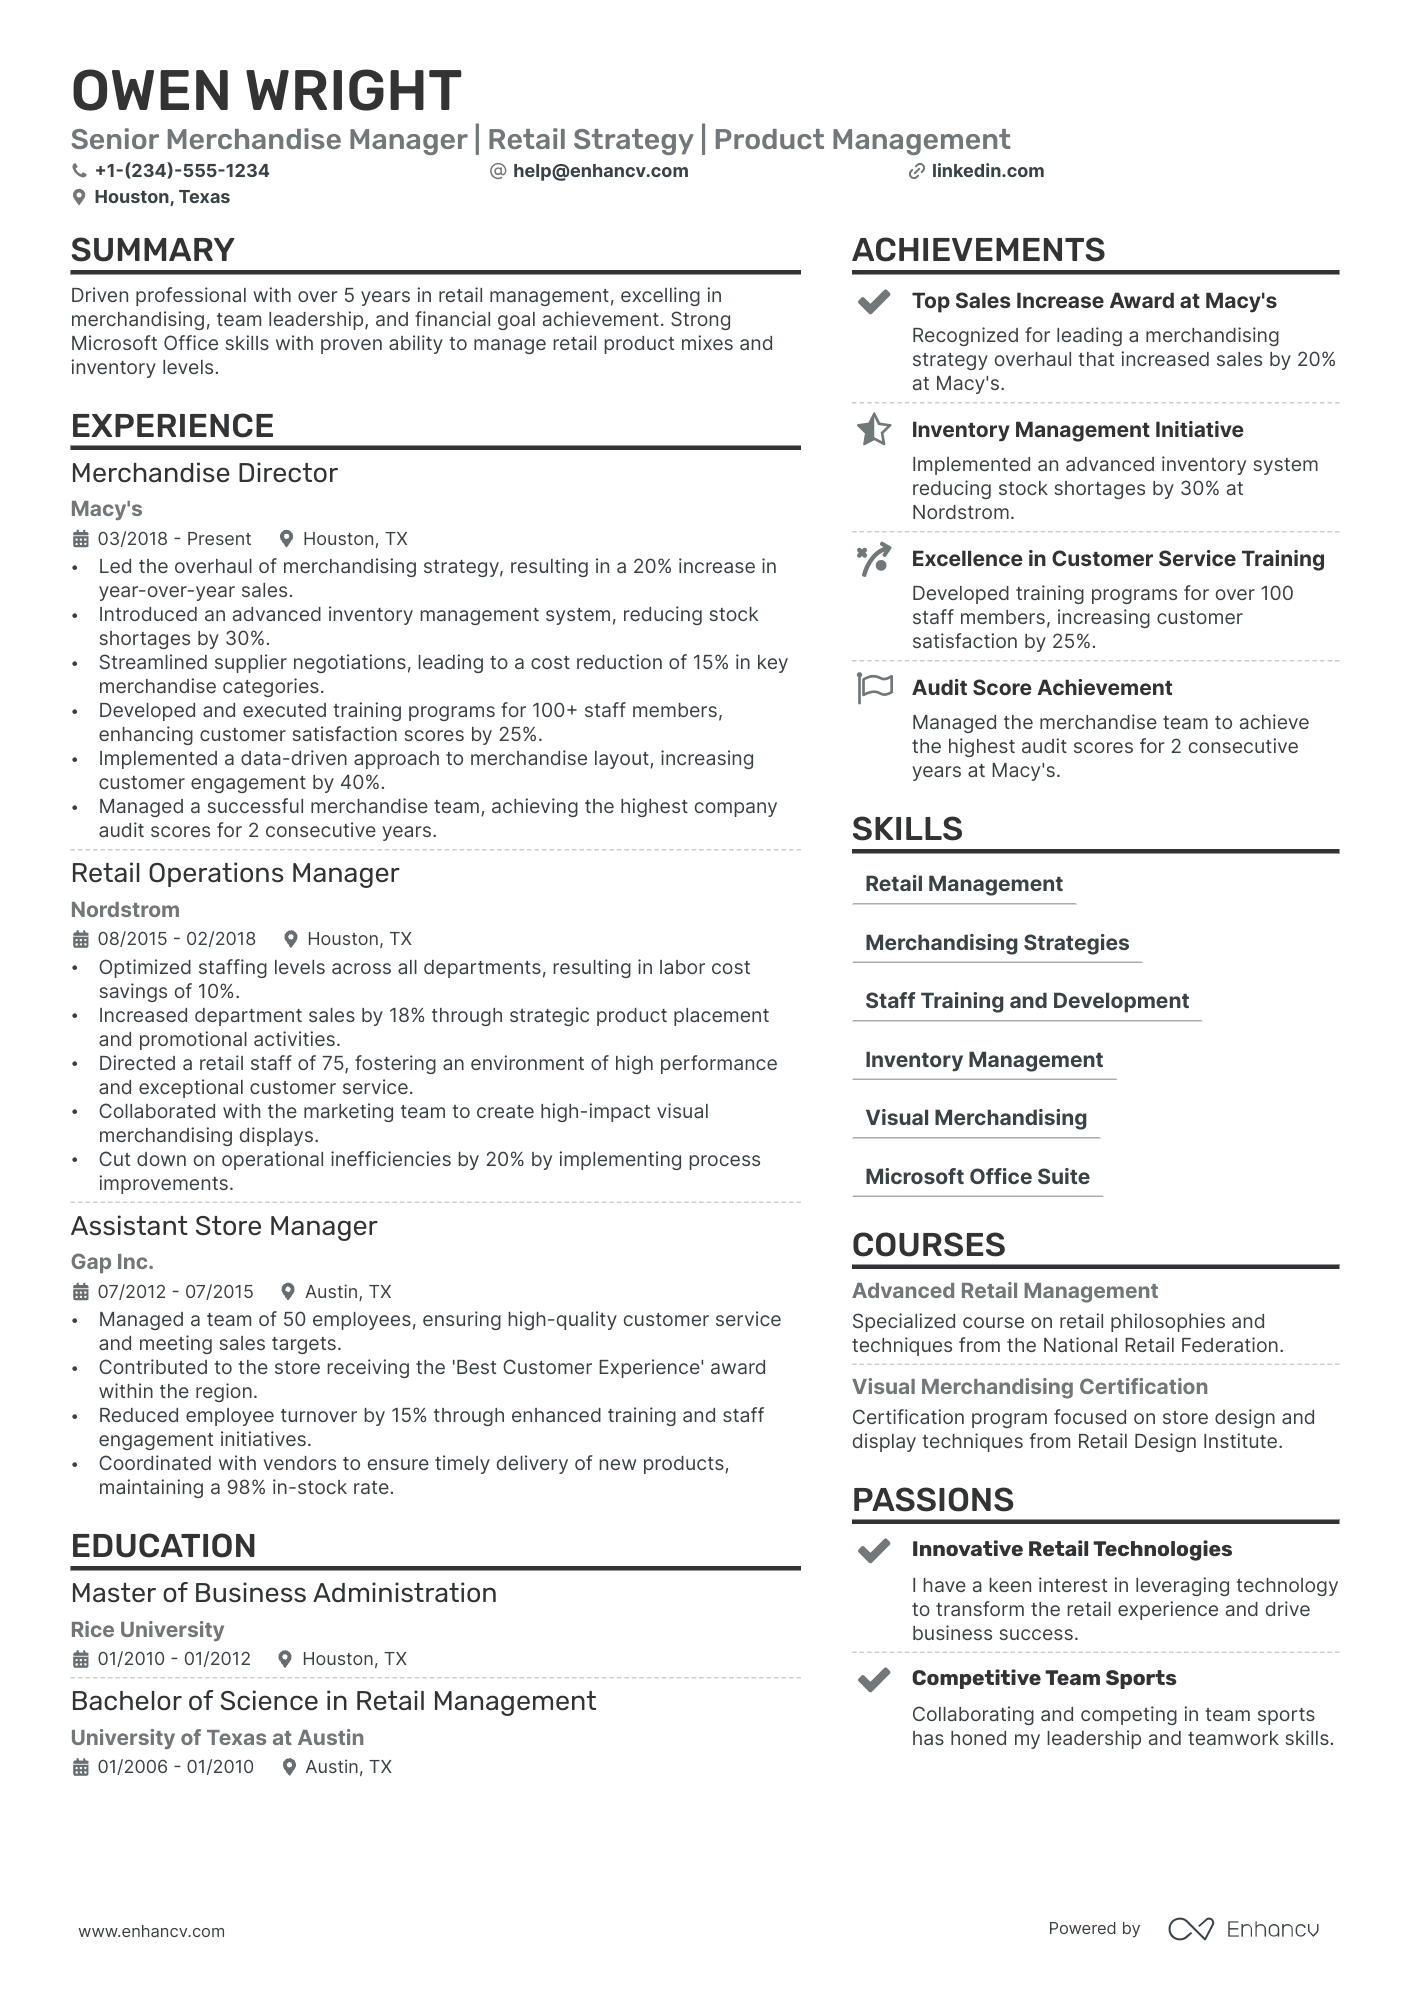 Merchandise Manager resume example